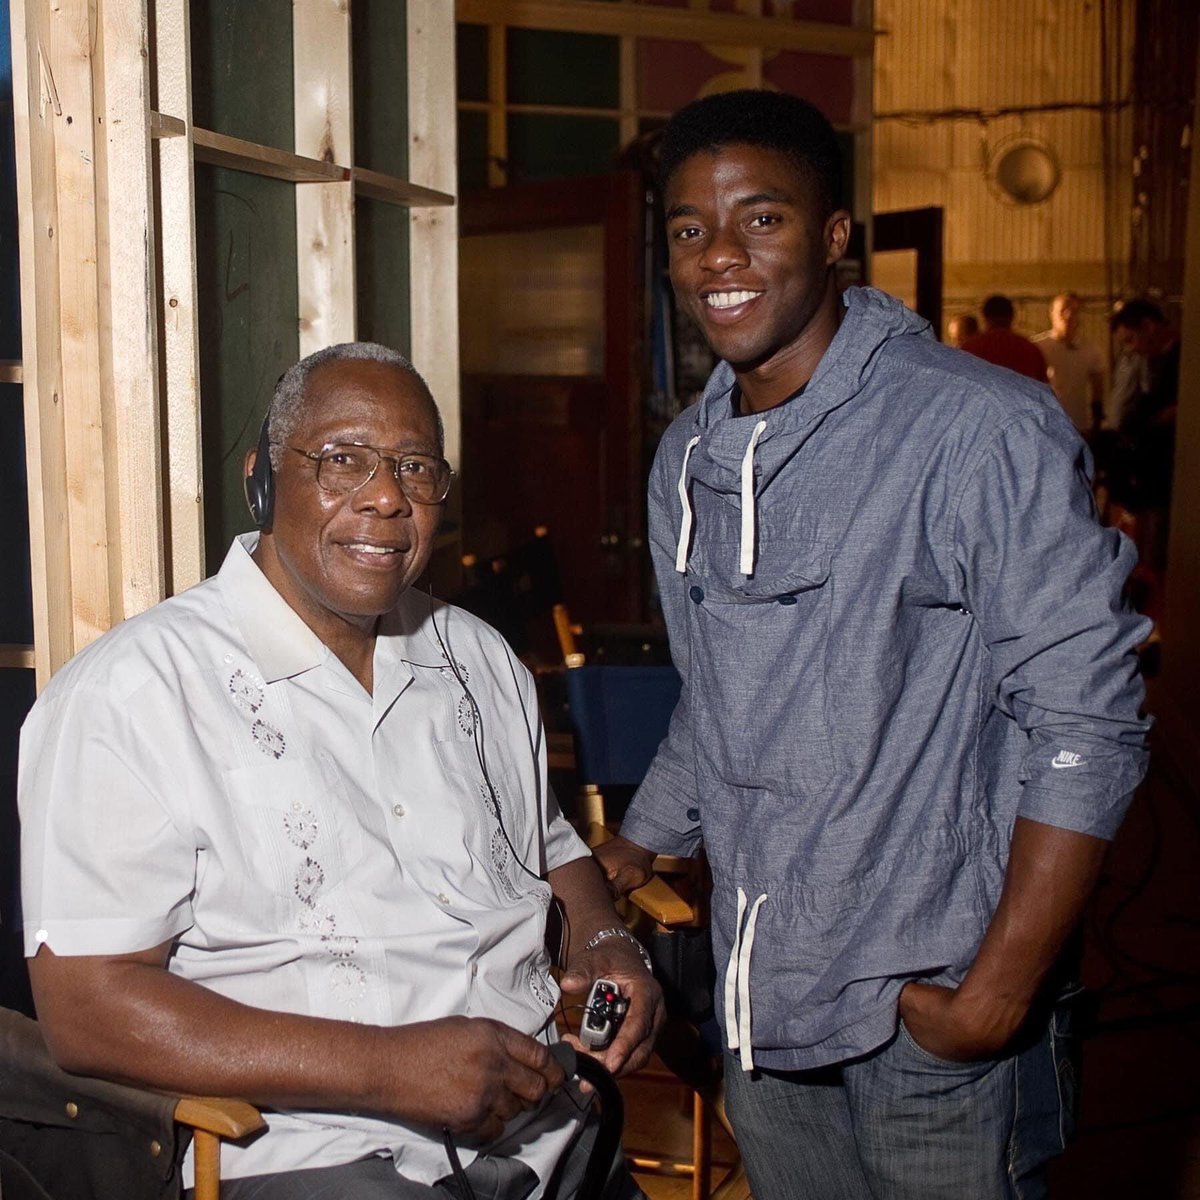 RT @nut_history: Hank Aaron and actor Chadwick Boseman on the set of the movie 